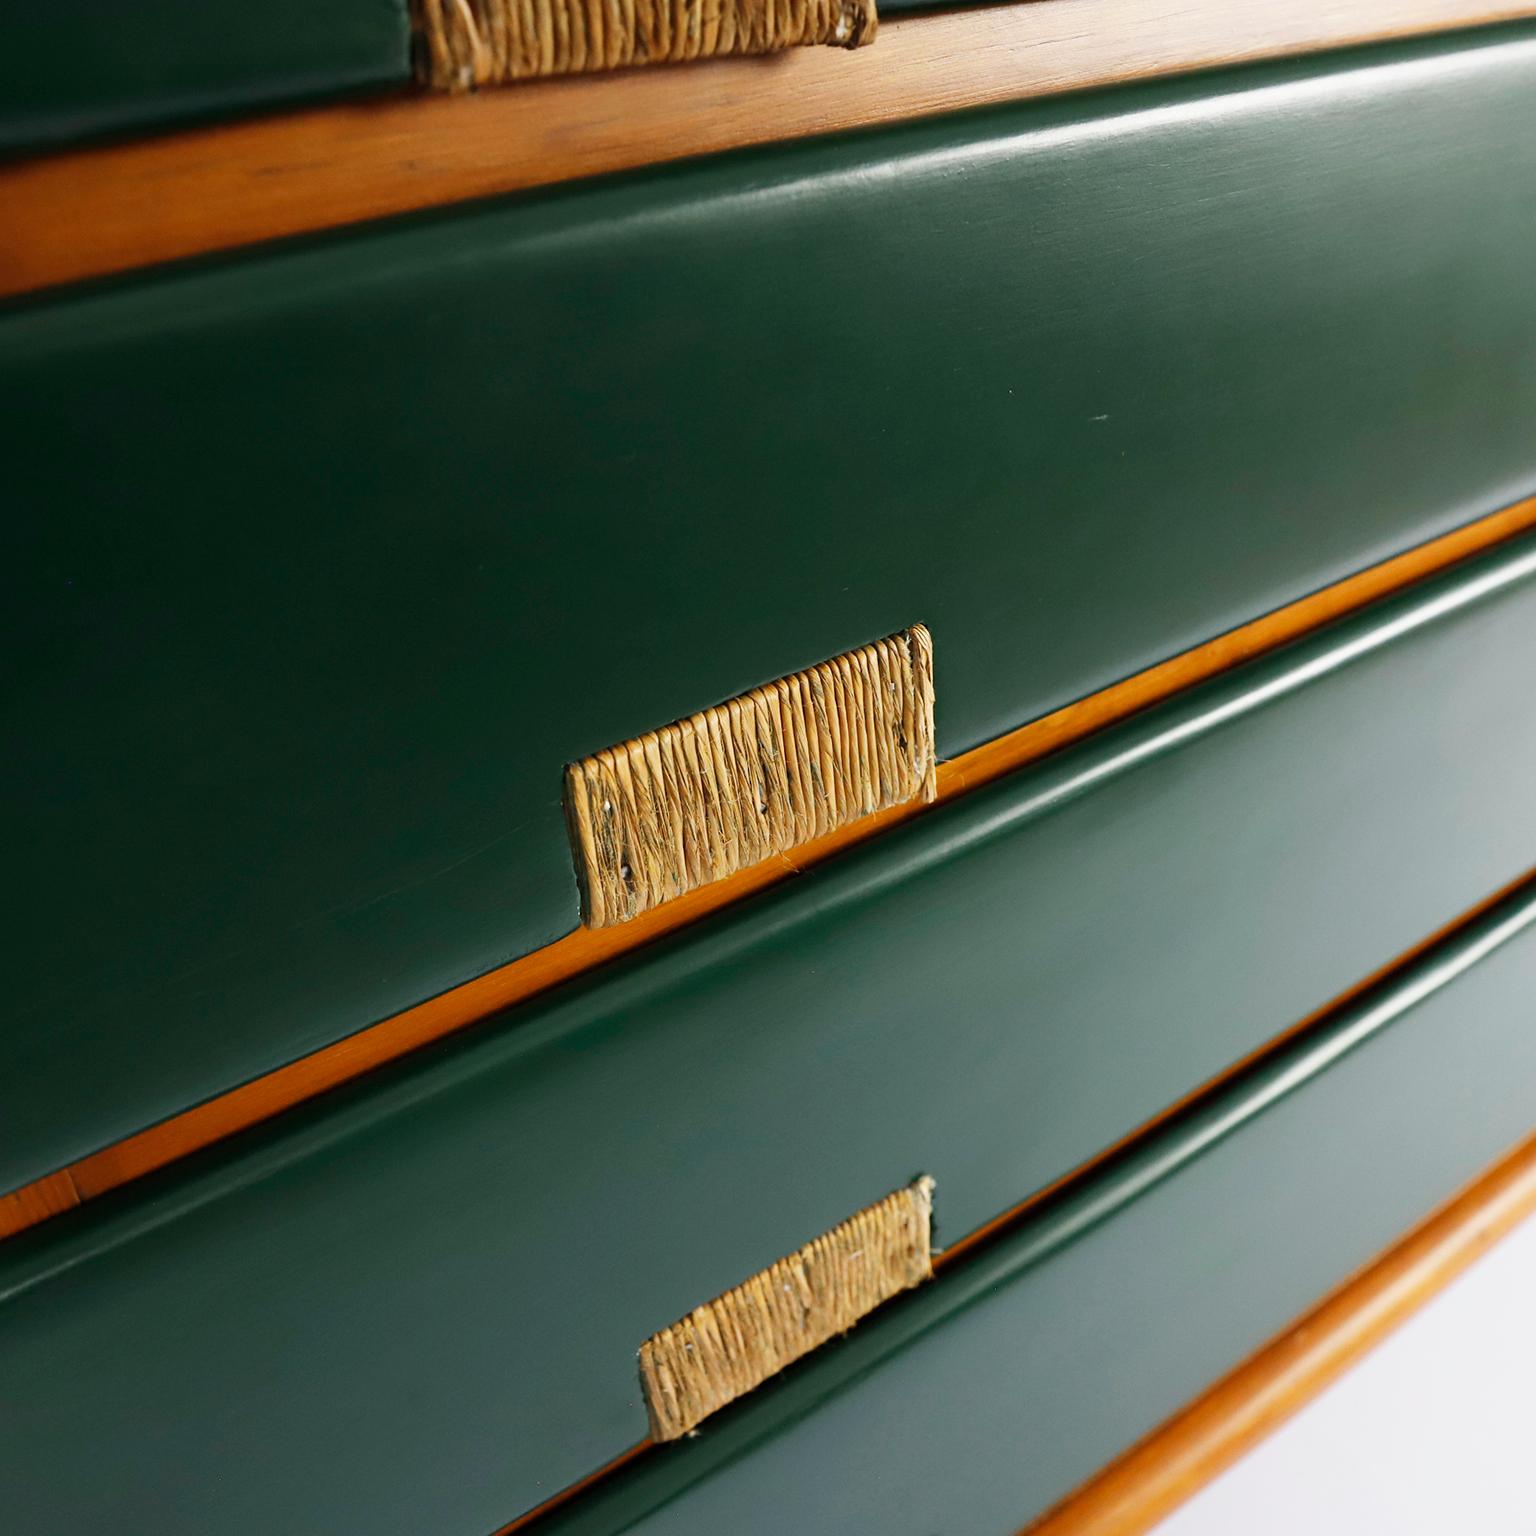 We offer this rare an early original Domus drawer designed by Michael Van Beuren in pine wood with the characteristic green Van Beuren color, designed by the American Bauhaus designer, Michael Van Beuren in Mexico, circa 1950, this handmade, solid